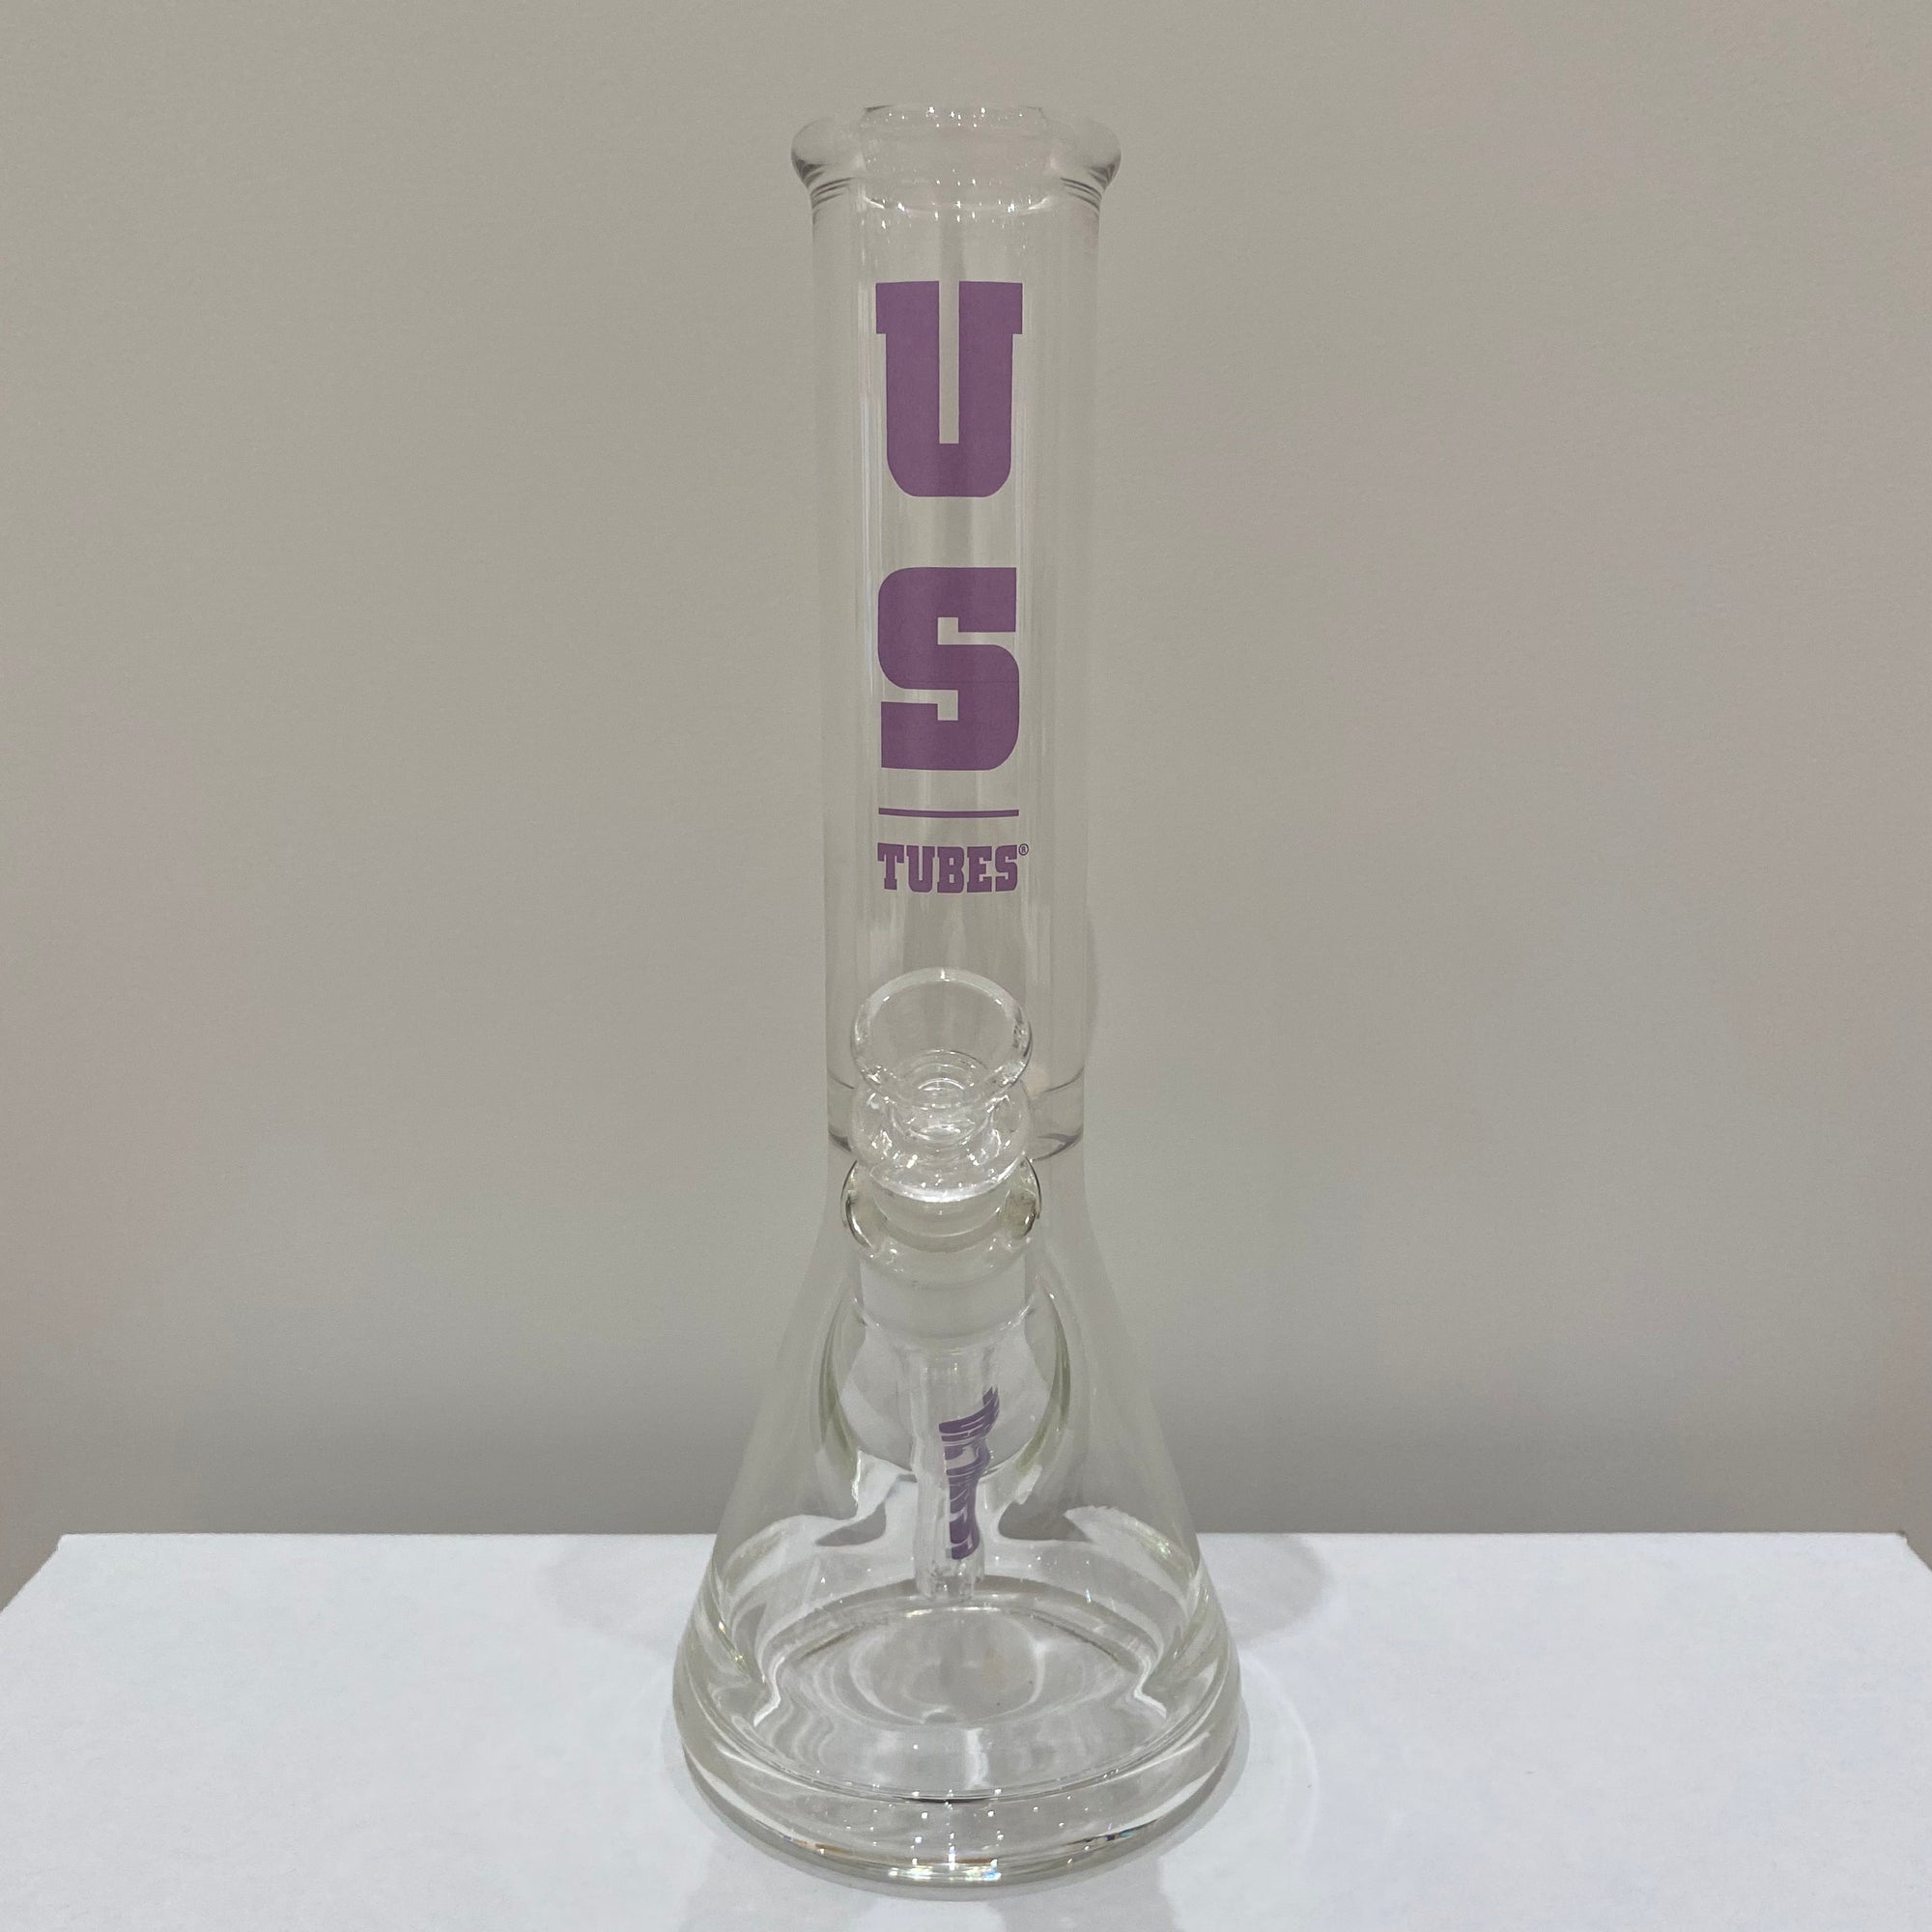 US Tubes Beaker 55, 12 Inch, Constriction, 19mm Joint